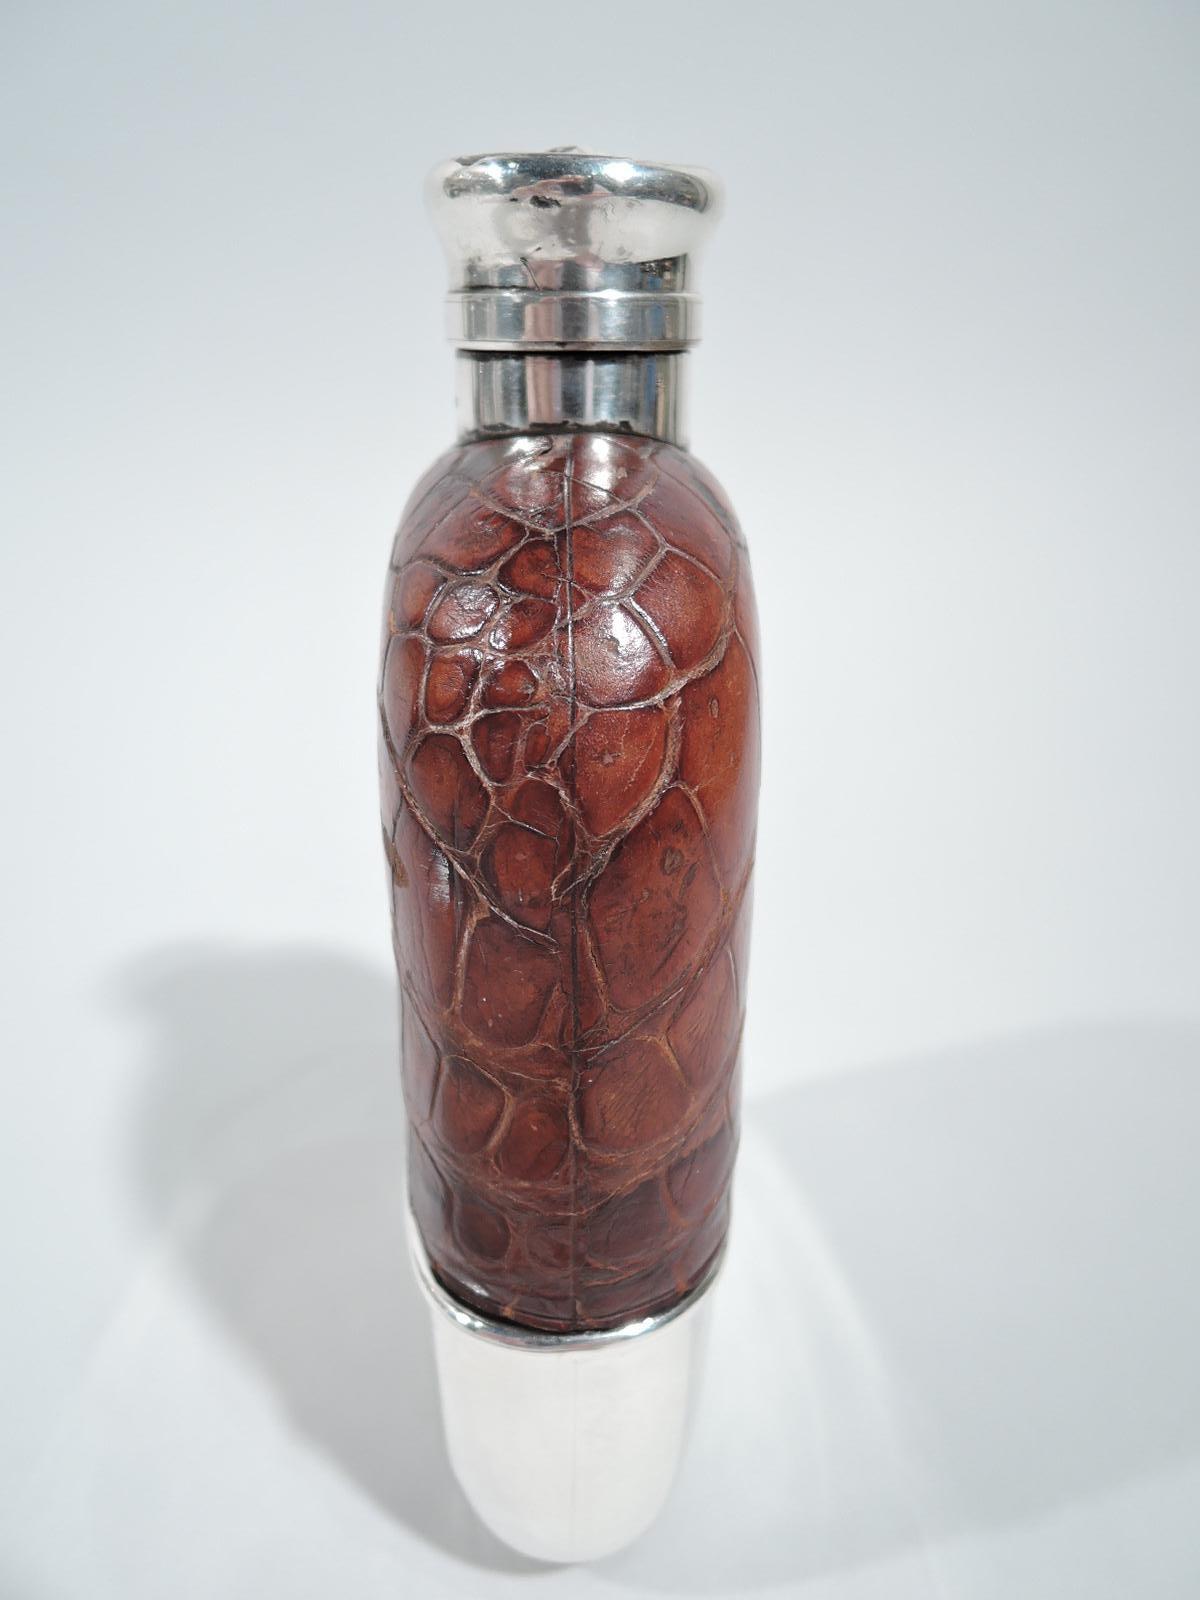 Big-game era flask. Made by Gorham in Providence in 1891. Clear-glass body. Top encased in leather and bottom has detachable sterling silver cup. Neck sterling silver as is hinged and cork-lined bayonet cover for convenient one-handed opening while